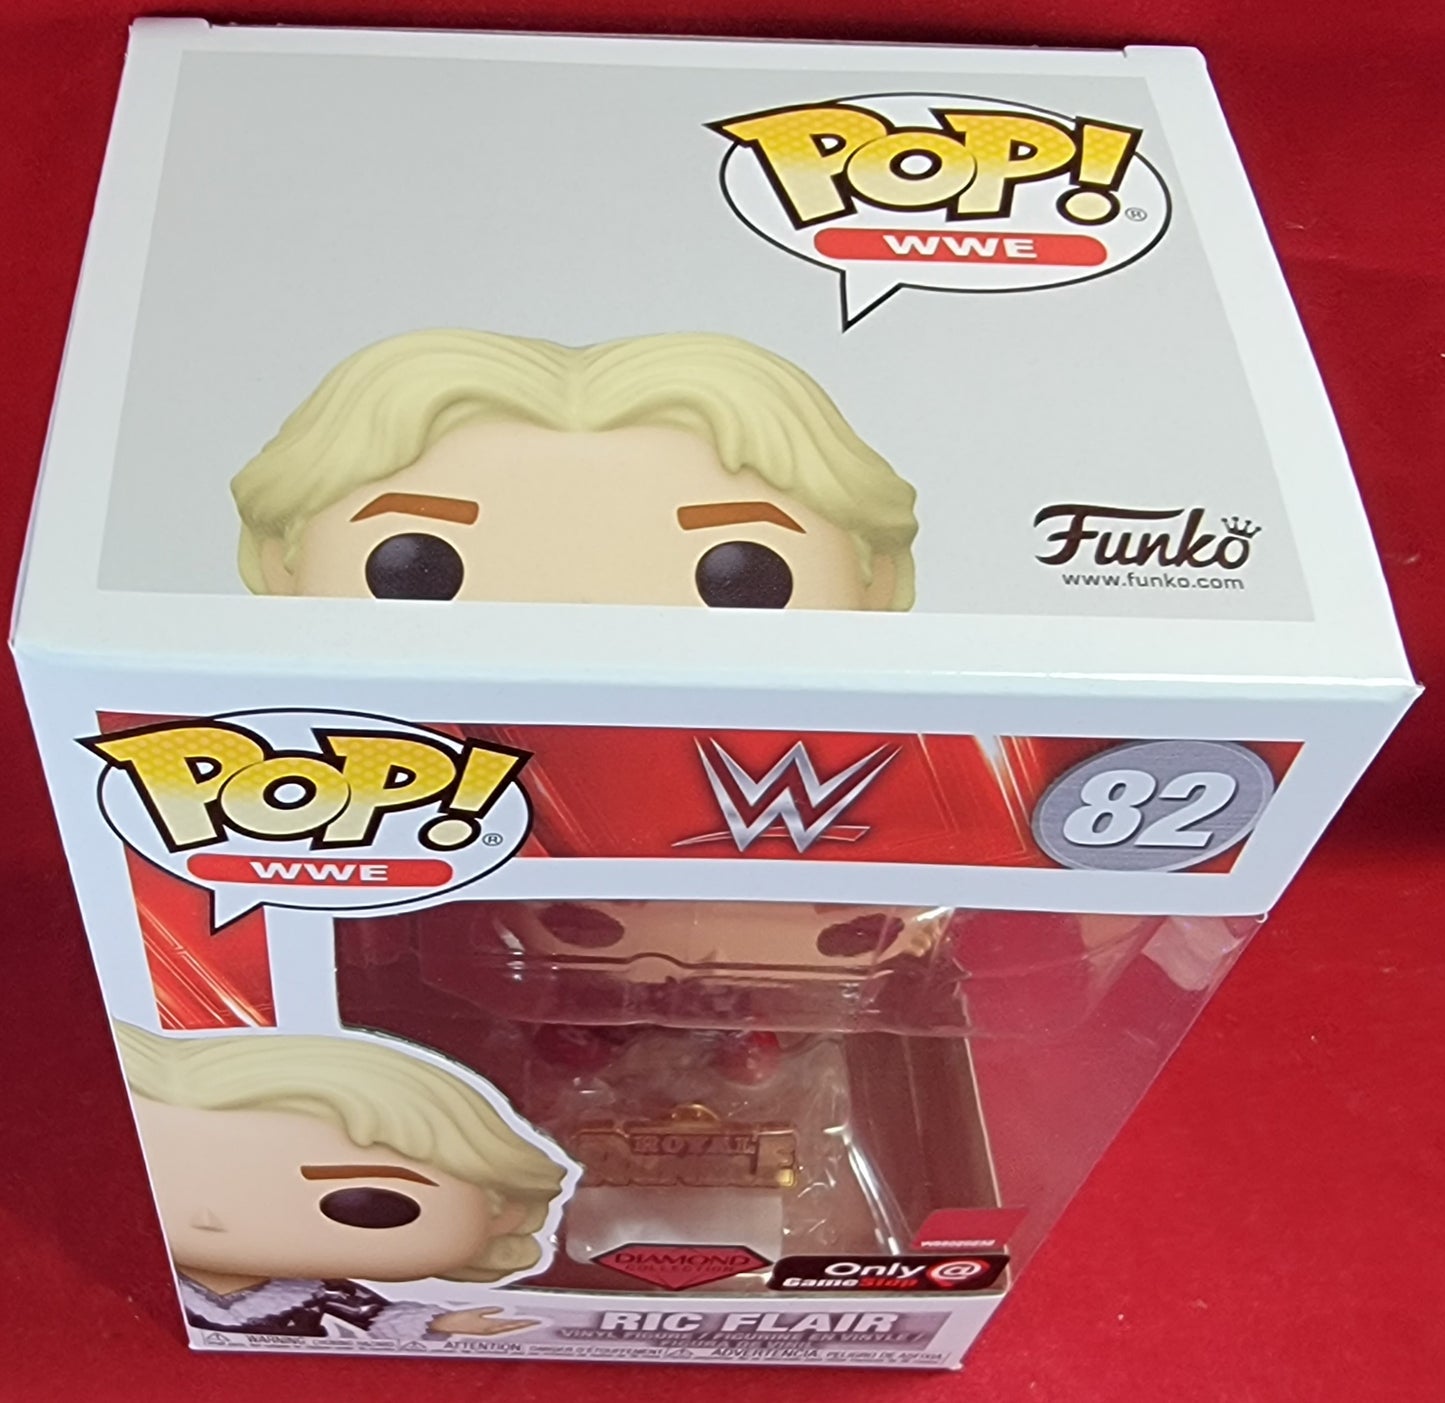 Ric flair gamestop exclusive funko # 82 (nib)
brand new diamond exclusive ric from wwe. pop has ric in black, grey, white with belt on shoulder. pop is in near perfect condition and will be shipped in a compatible pop protector.